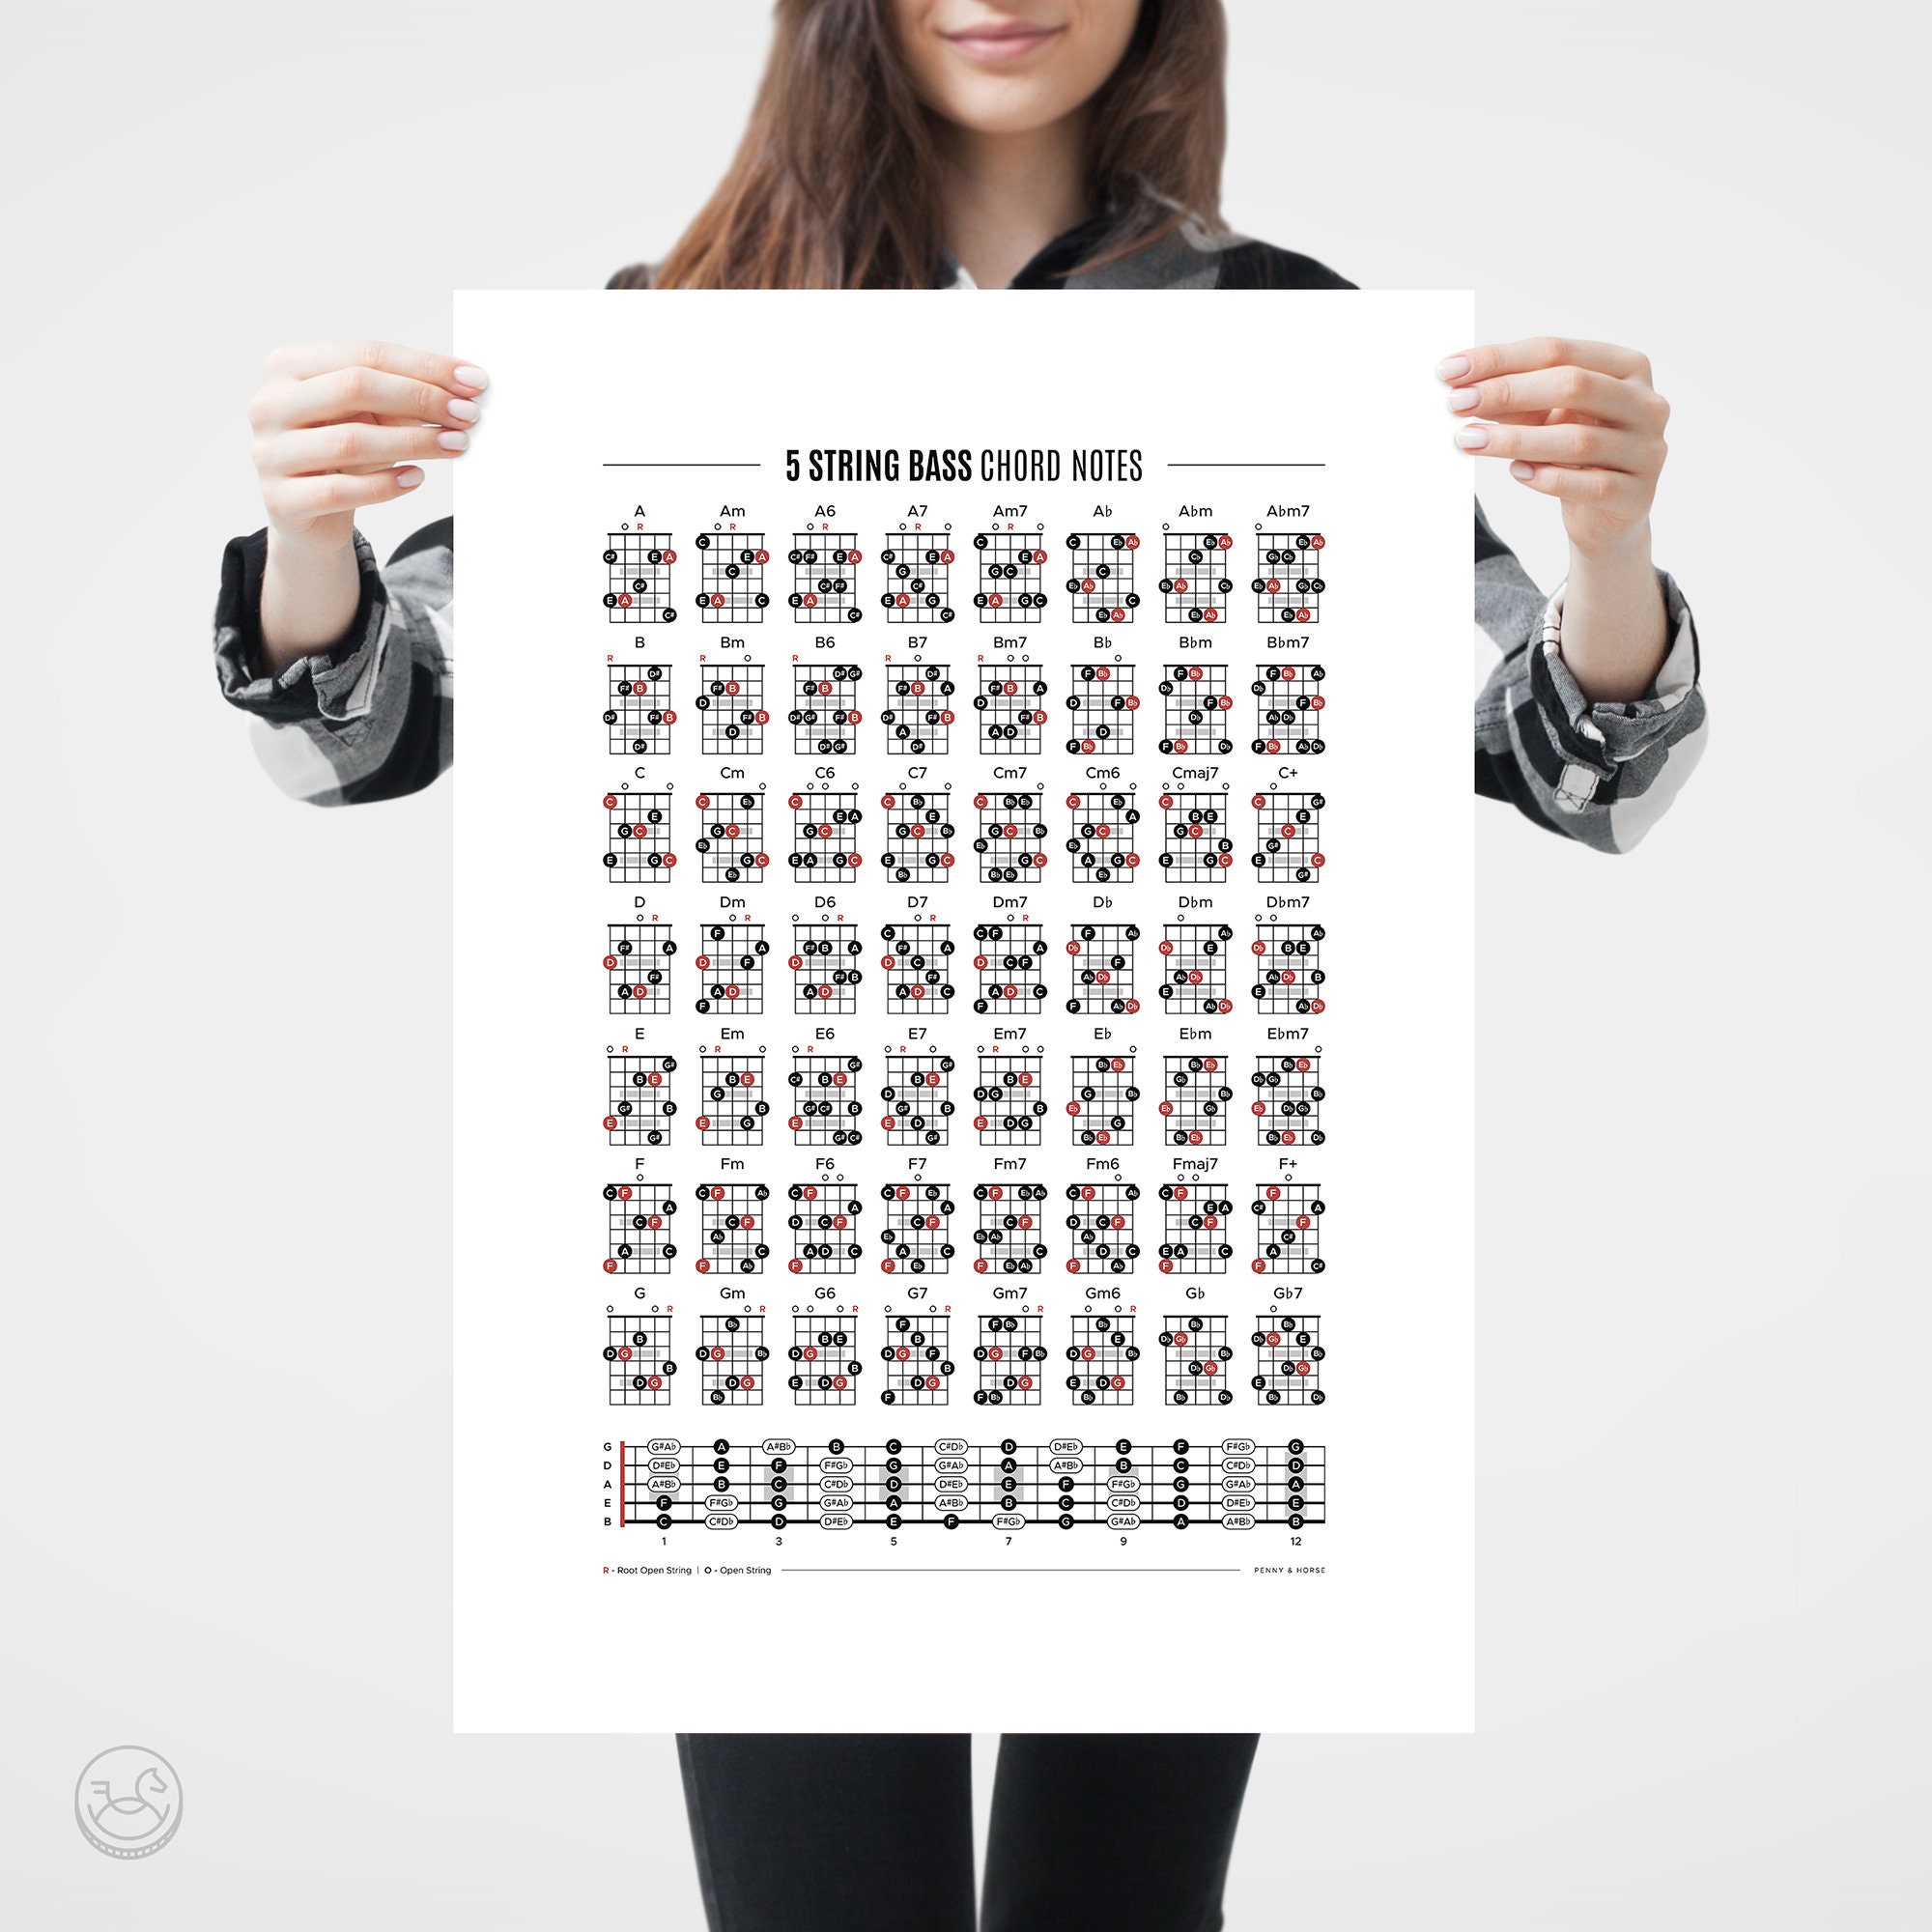  Mini Bass Guitar Chord Chart with 56 Chords - Laminated Bass  Guitar Chord Poster for Beginners and Musicians - Music Theory Poster -  Bass Guitar Accessories - 8.5 x 11 